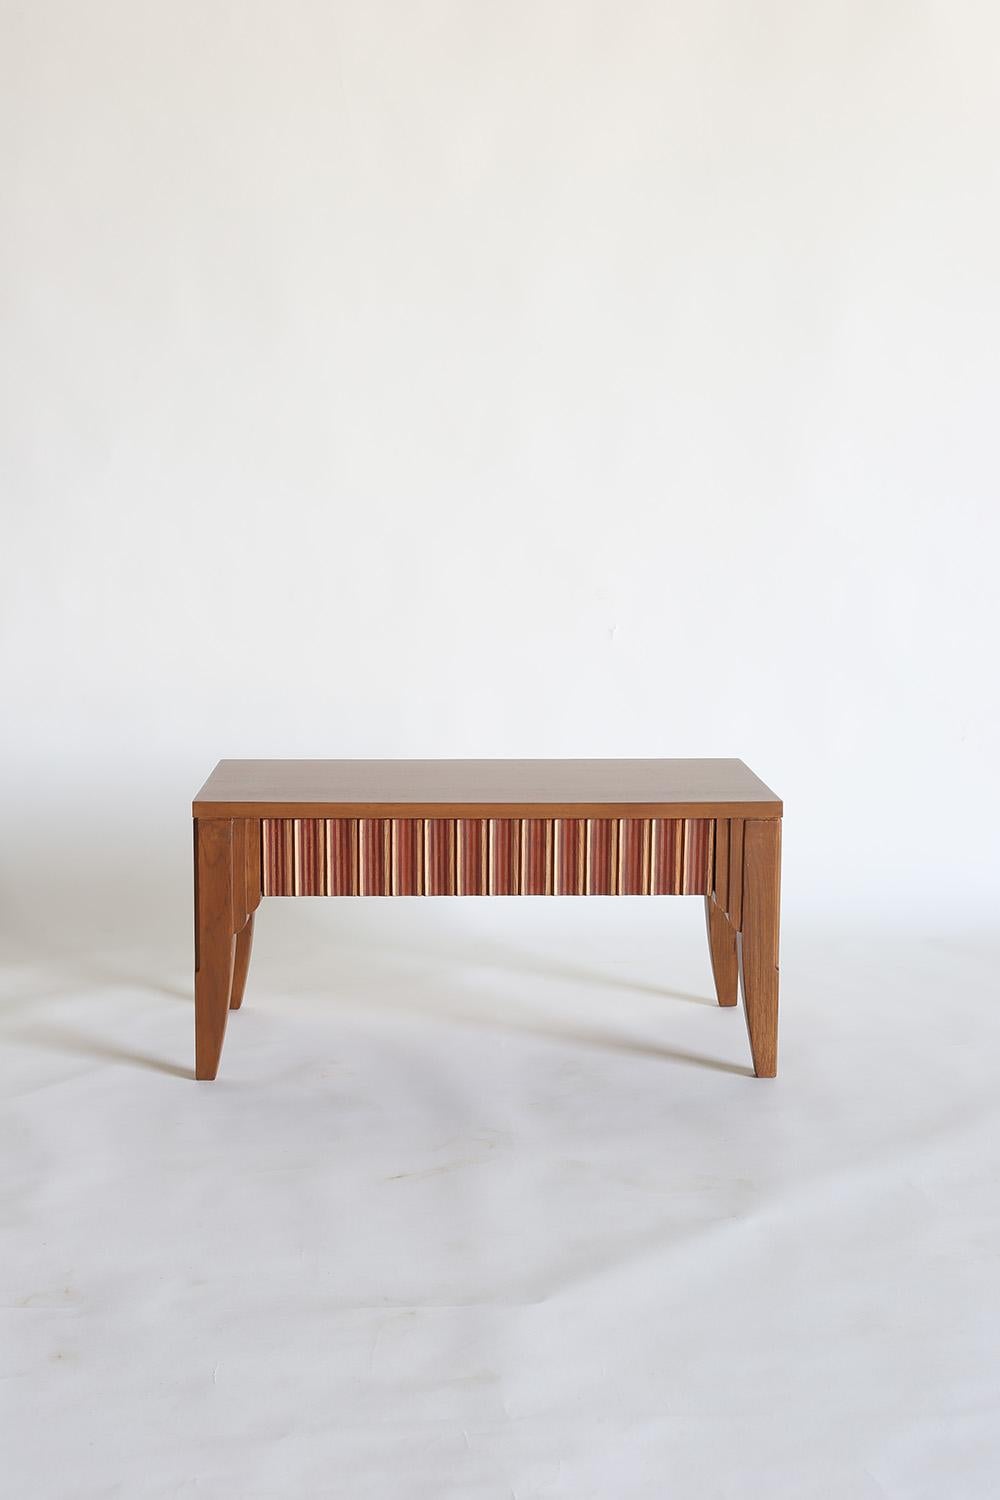 The Epoch side table captures the heart of enduring design that can span decades. Handcrafted in Gujarat, India, from white oak comes a minimalist silhouette with fine inlaid woodwork detailing. With each piece, you'll find an individual grain and